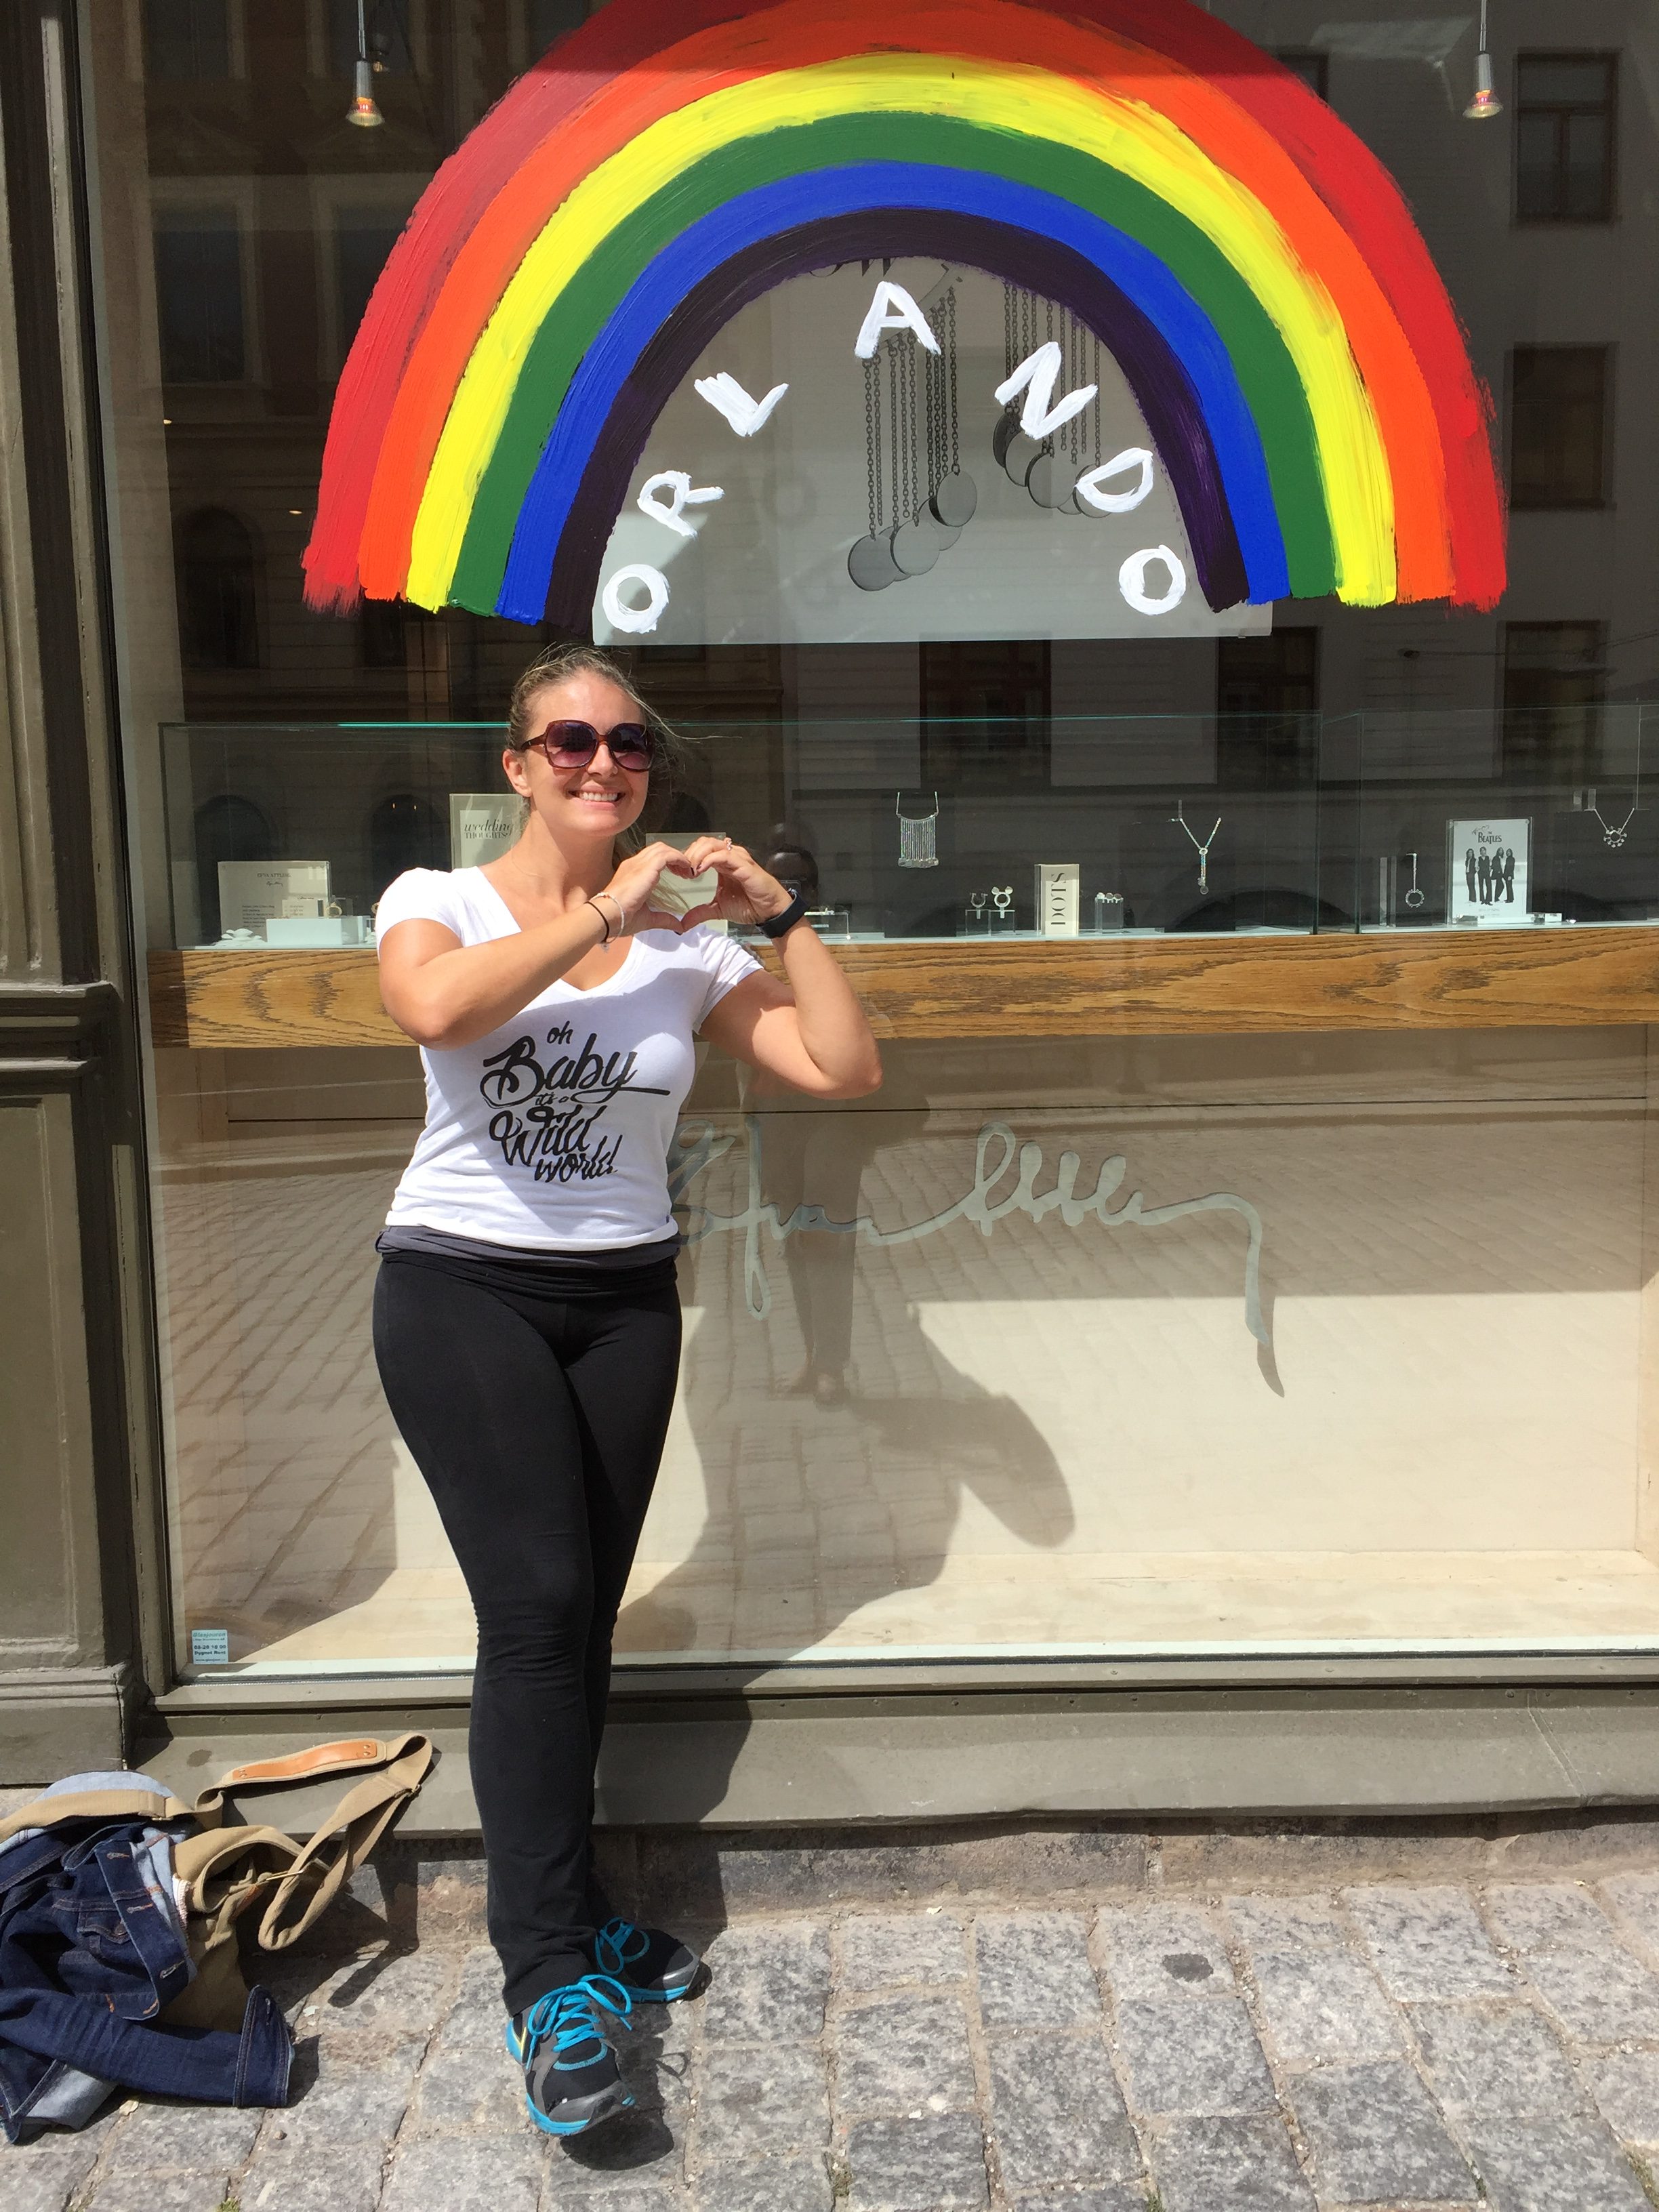 After the Pulse attack, Orlando love could be felt as far away as Stockholm, Sweden.